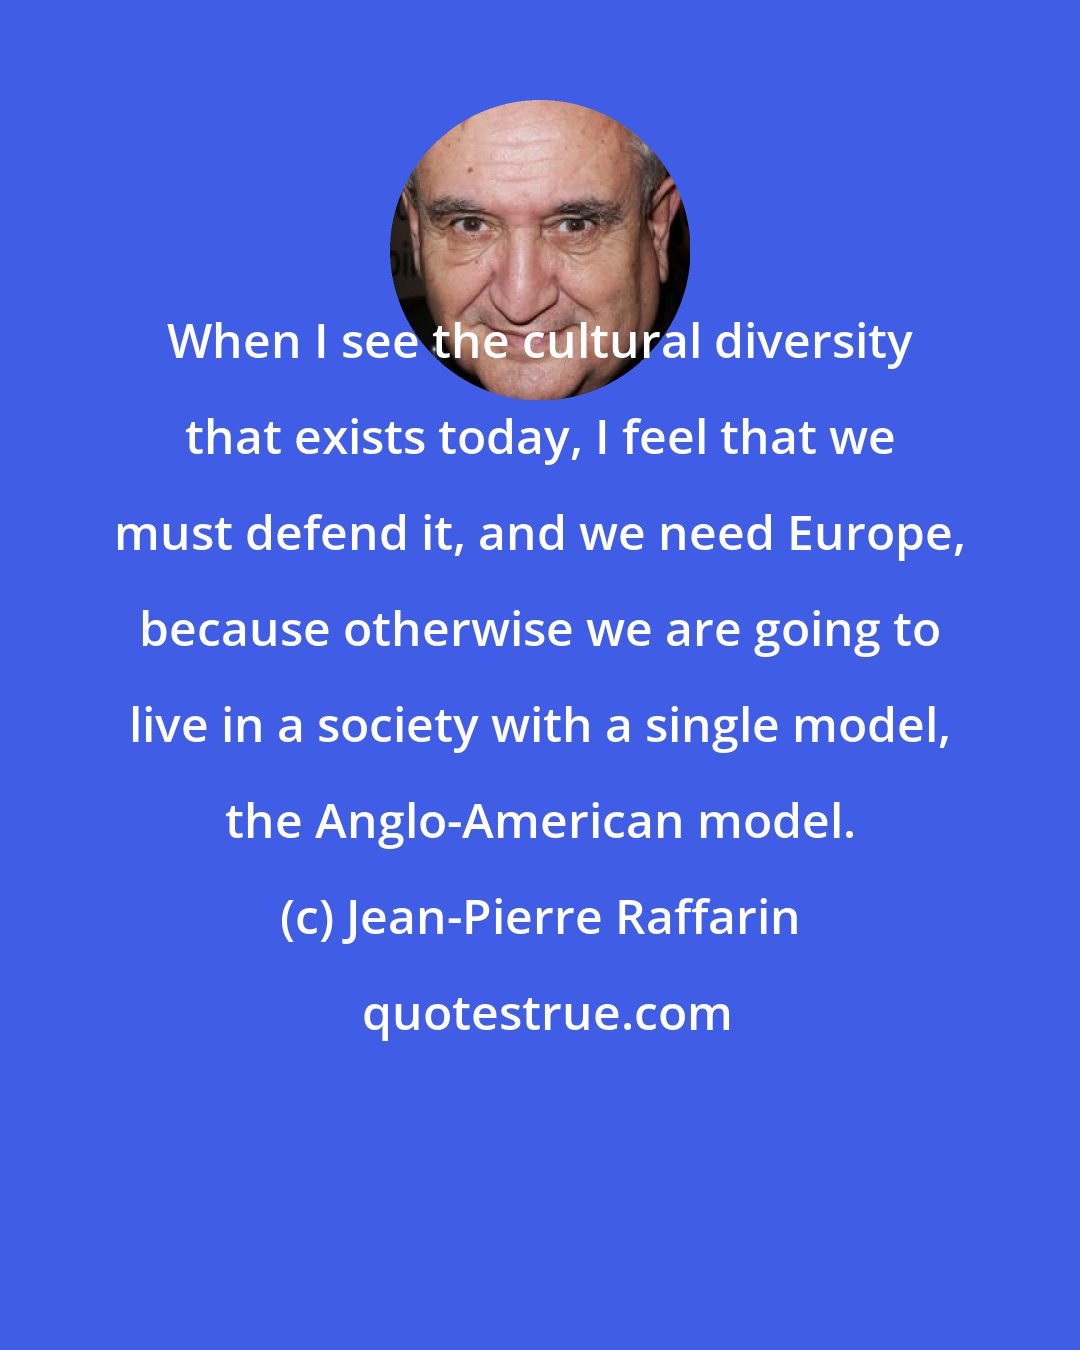 Jean-Pierre Raffarin: When I see the cultural diversity that exists today, I feel that we must defend it, and we need Europe, because otherwise we are going to live in a society with a single model, the Anglo-American model.